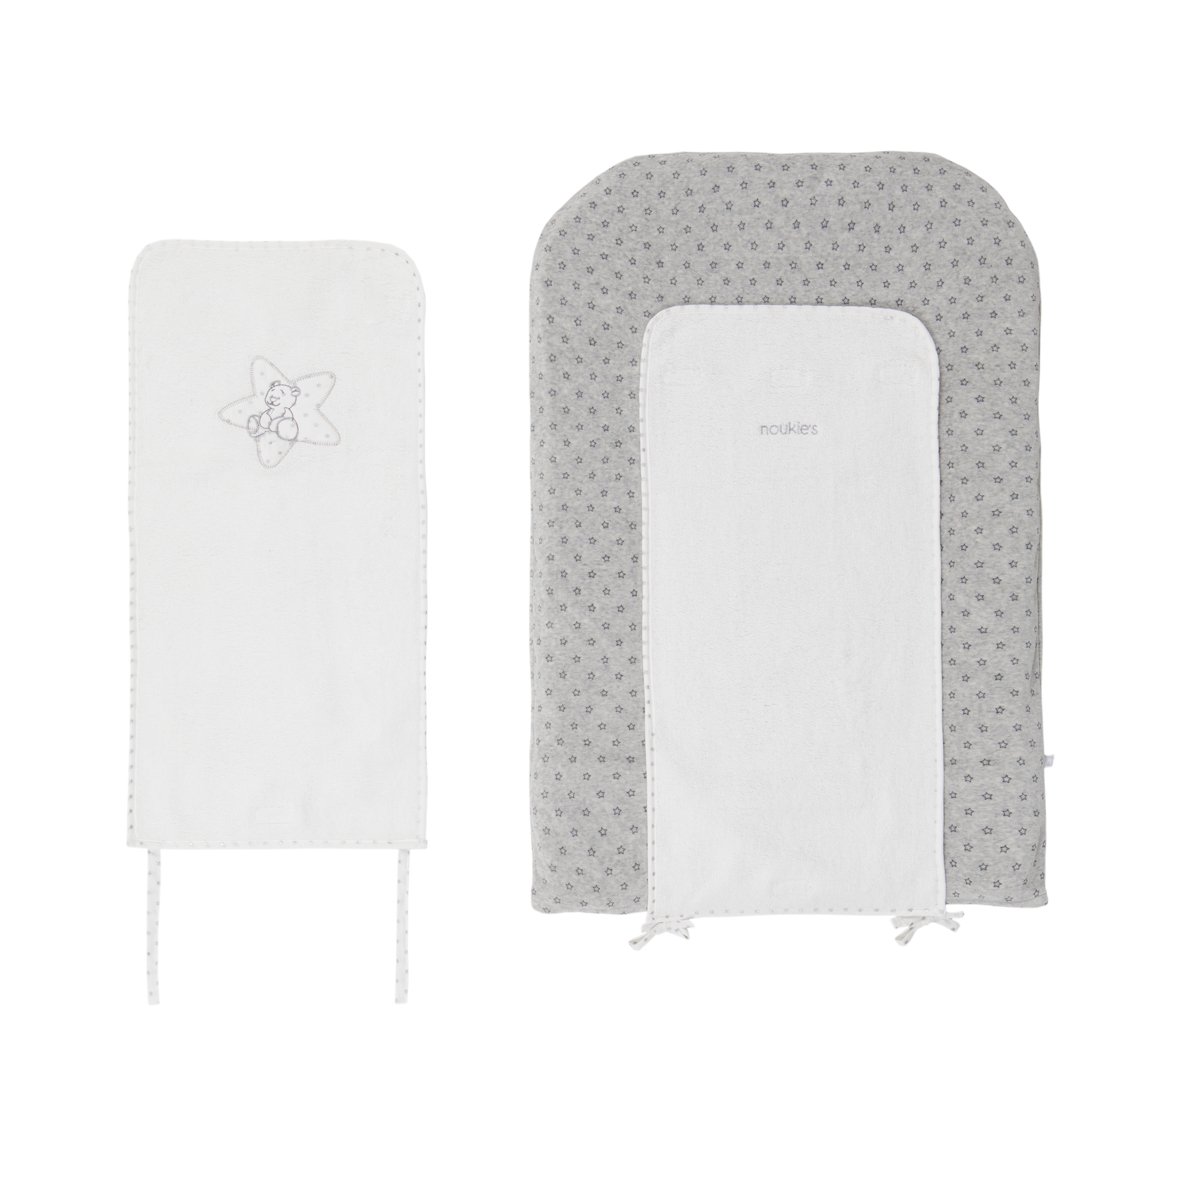 Noukies Etoiles BB1410.11 Changing Mat with 2 Covers